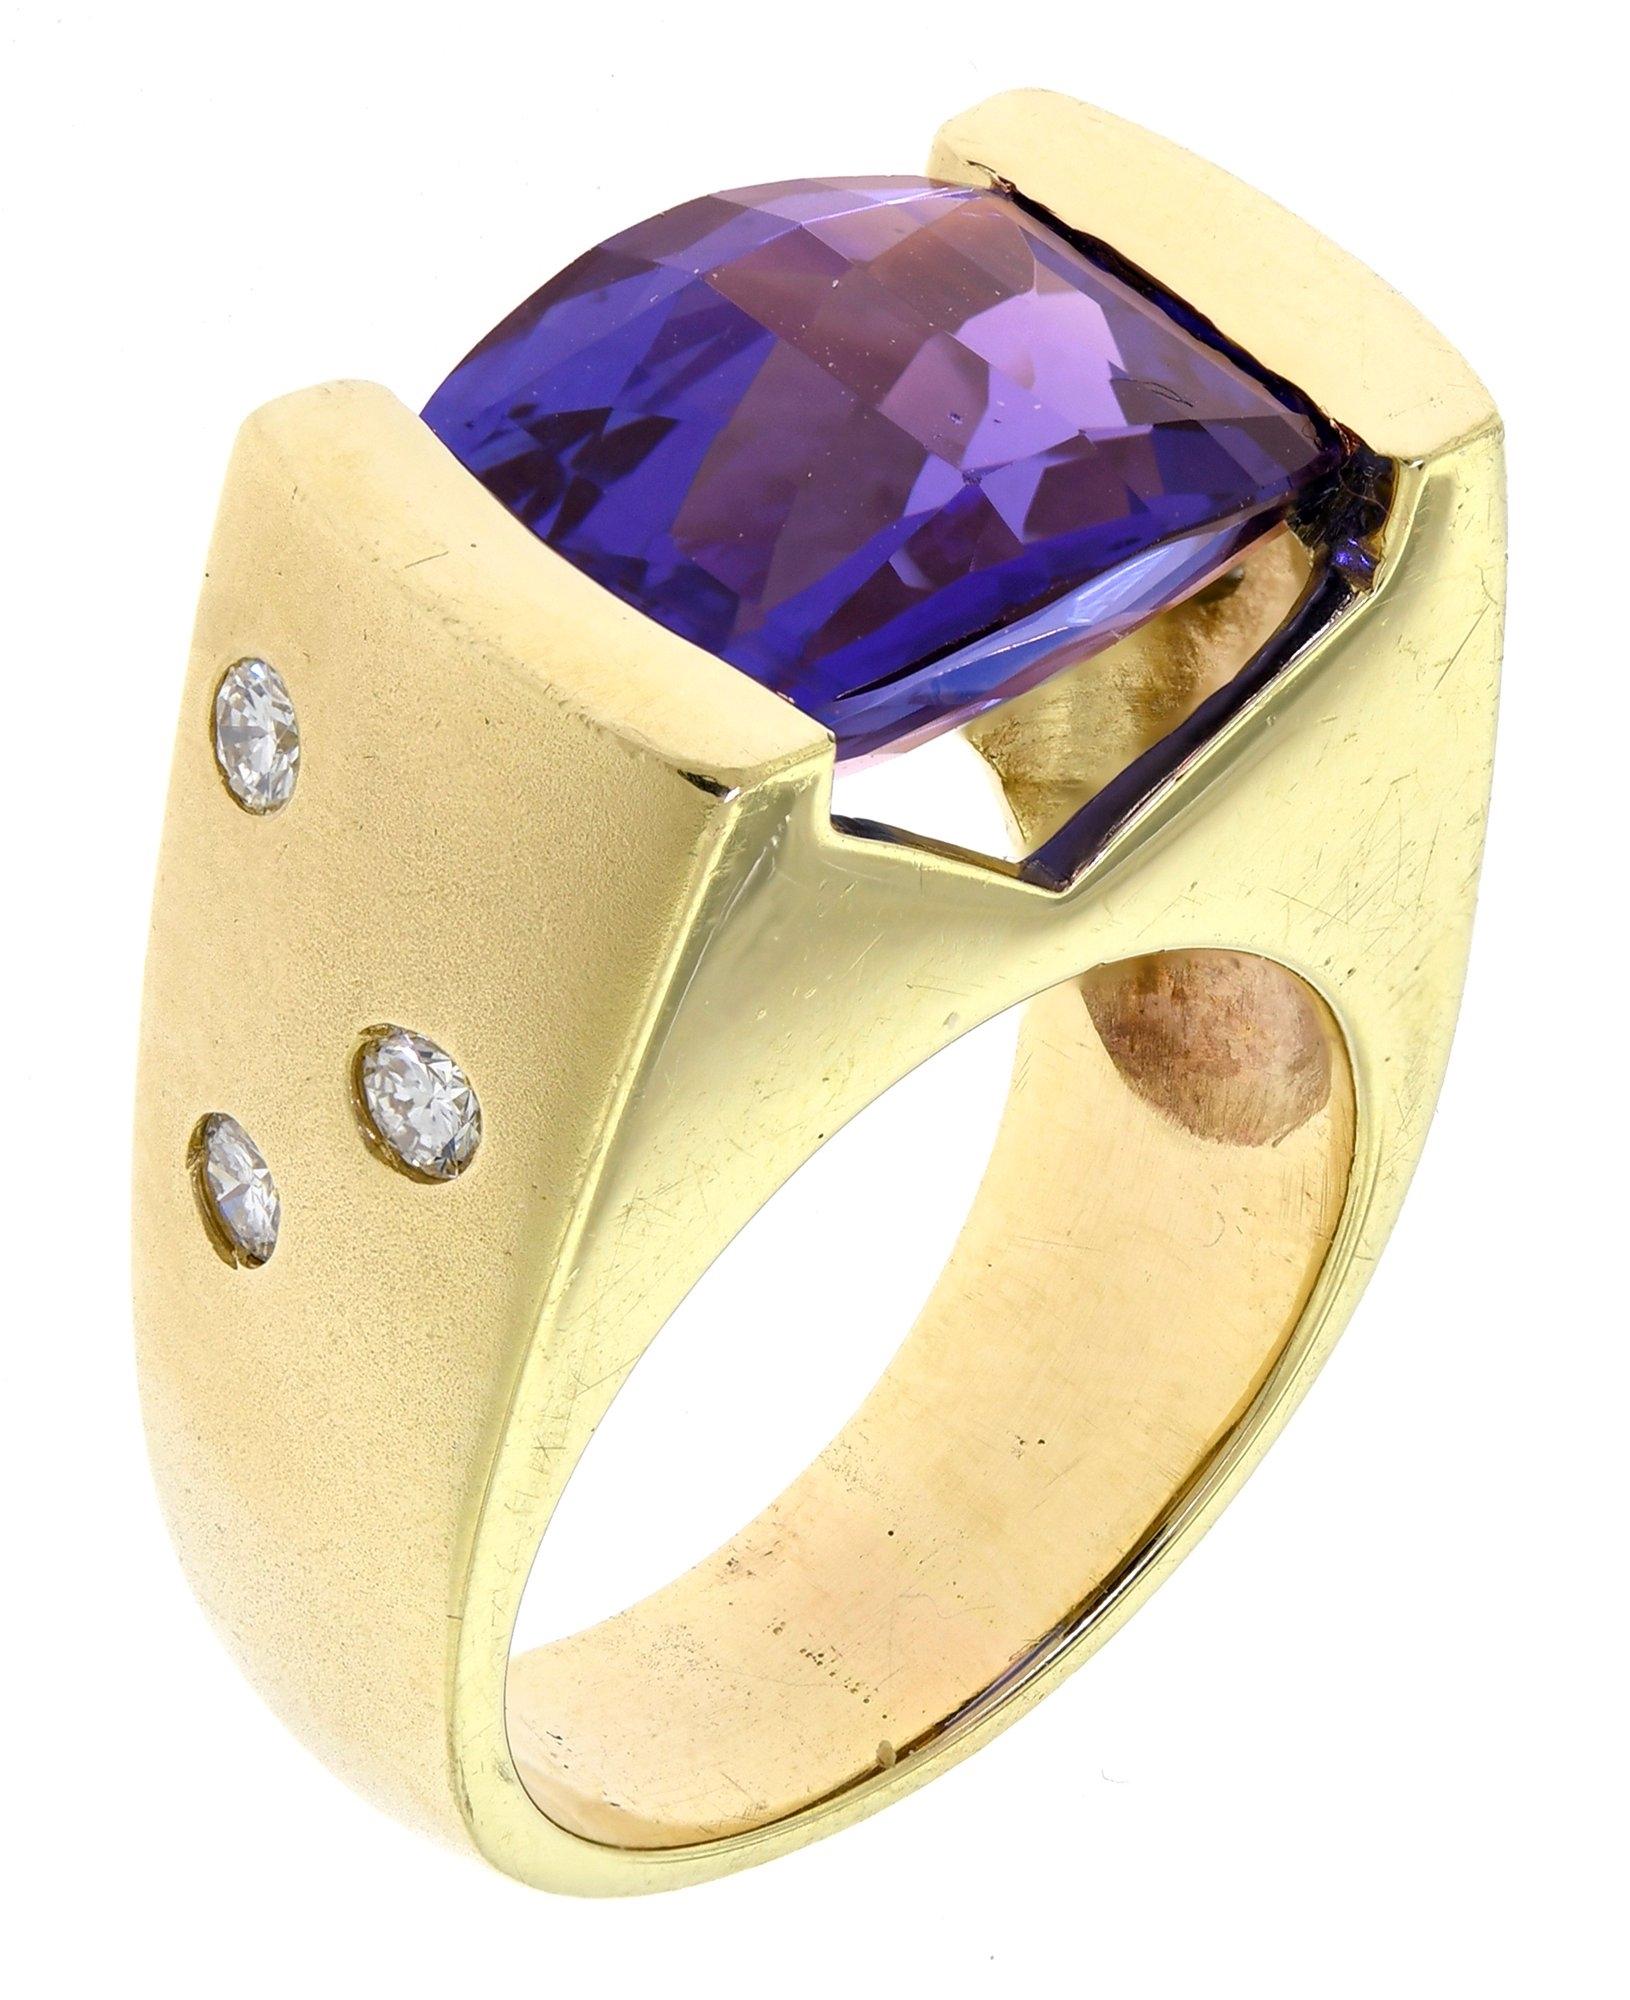 An Estate Piece with a large estimated 9ct Checkerboard Tanzanite in a 16gram 14kt yellow gold ring (that is over 1/2 a troy ounce), brushed gold on the sides, highly polished elsewhere, with 6 diamonds weighing an approximate total of 42pts